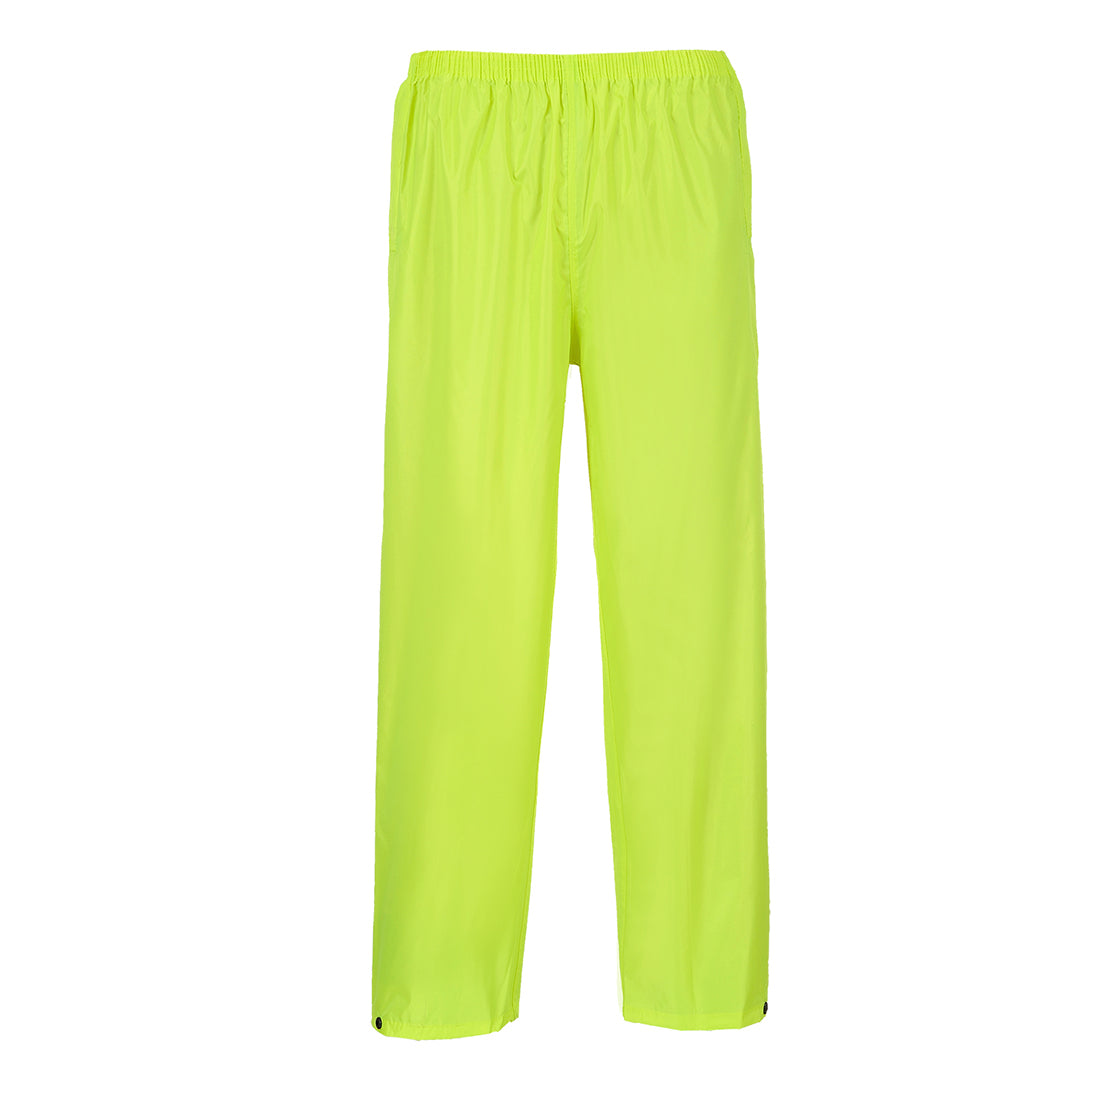 Portwest Rain Trousers Yellow - S441 Front